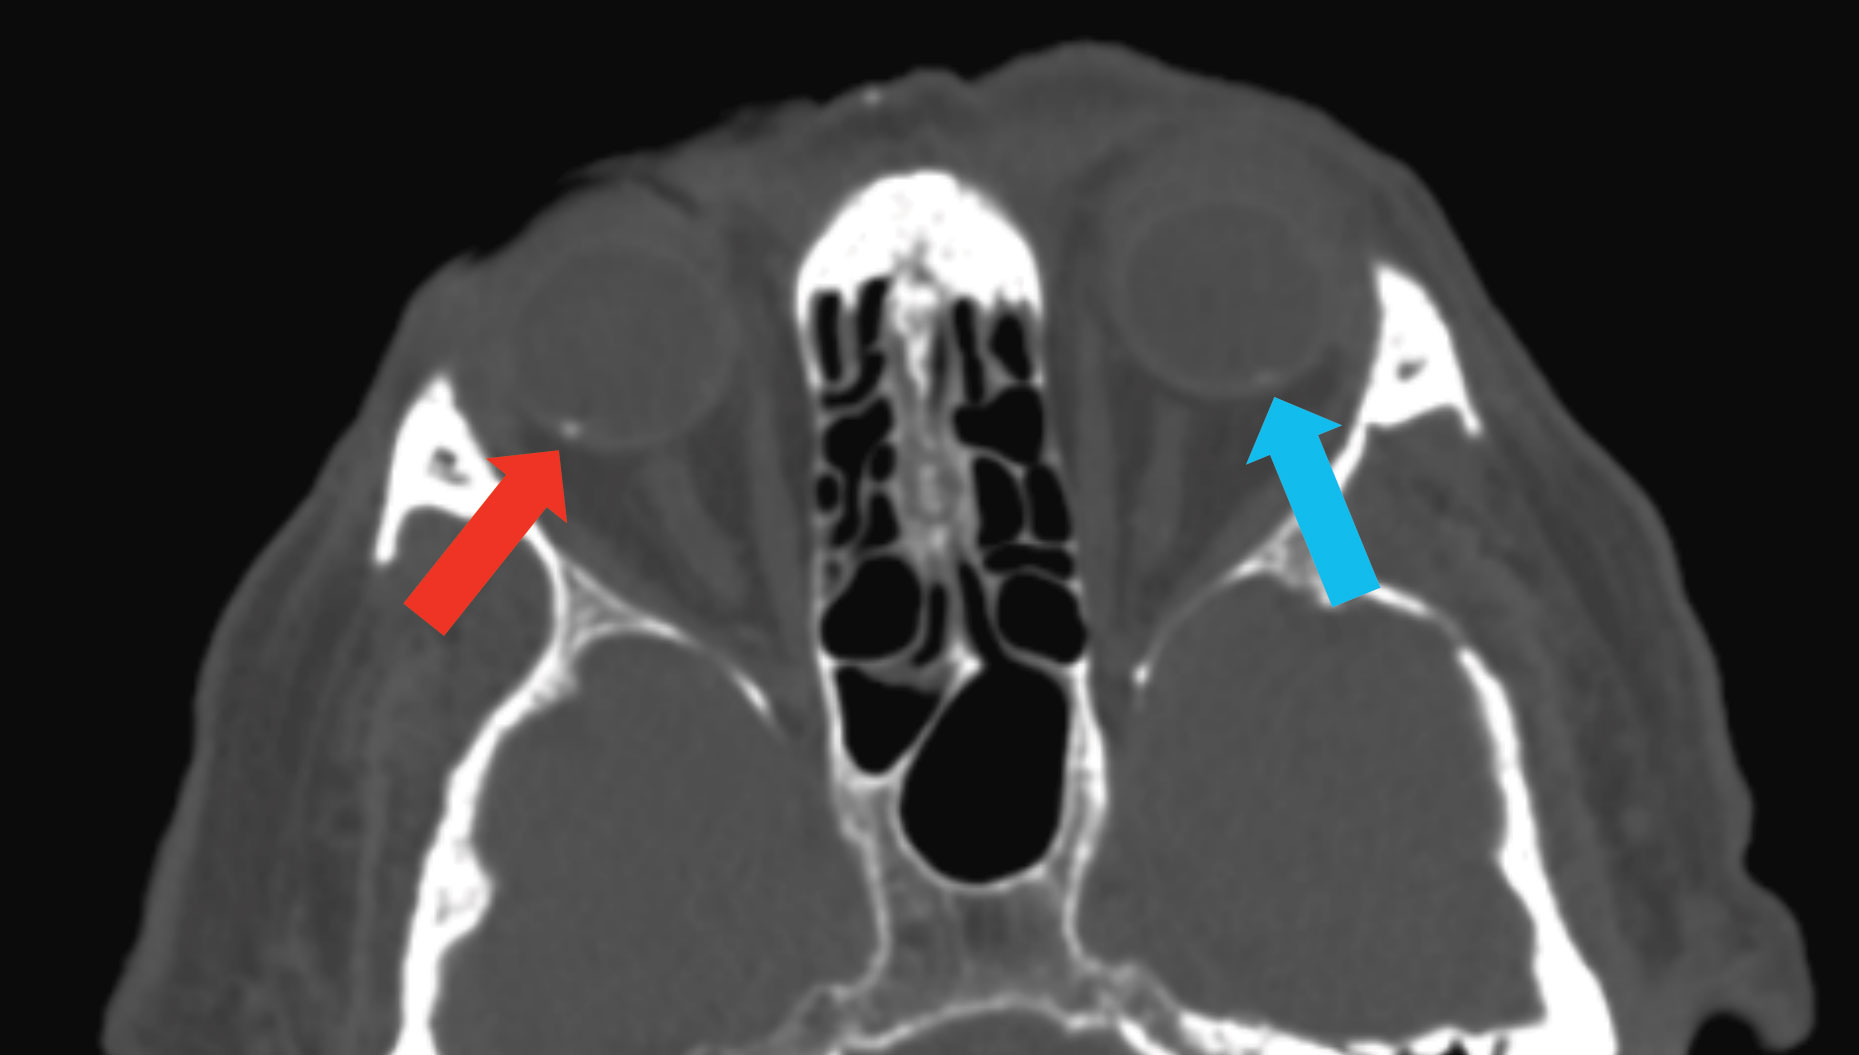 This CT scan demonstrates SCC in the right eye (blue arrow) and a subtle one in the left eye (red arrow), which was not visible on clinical exam.